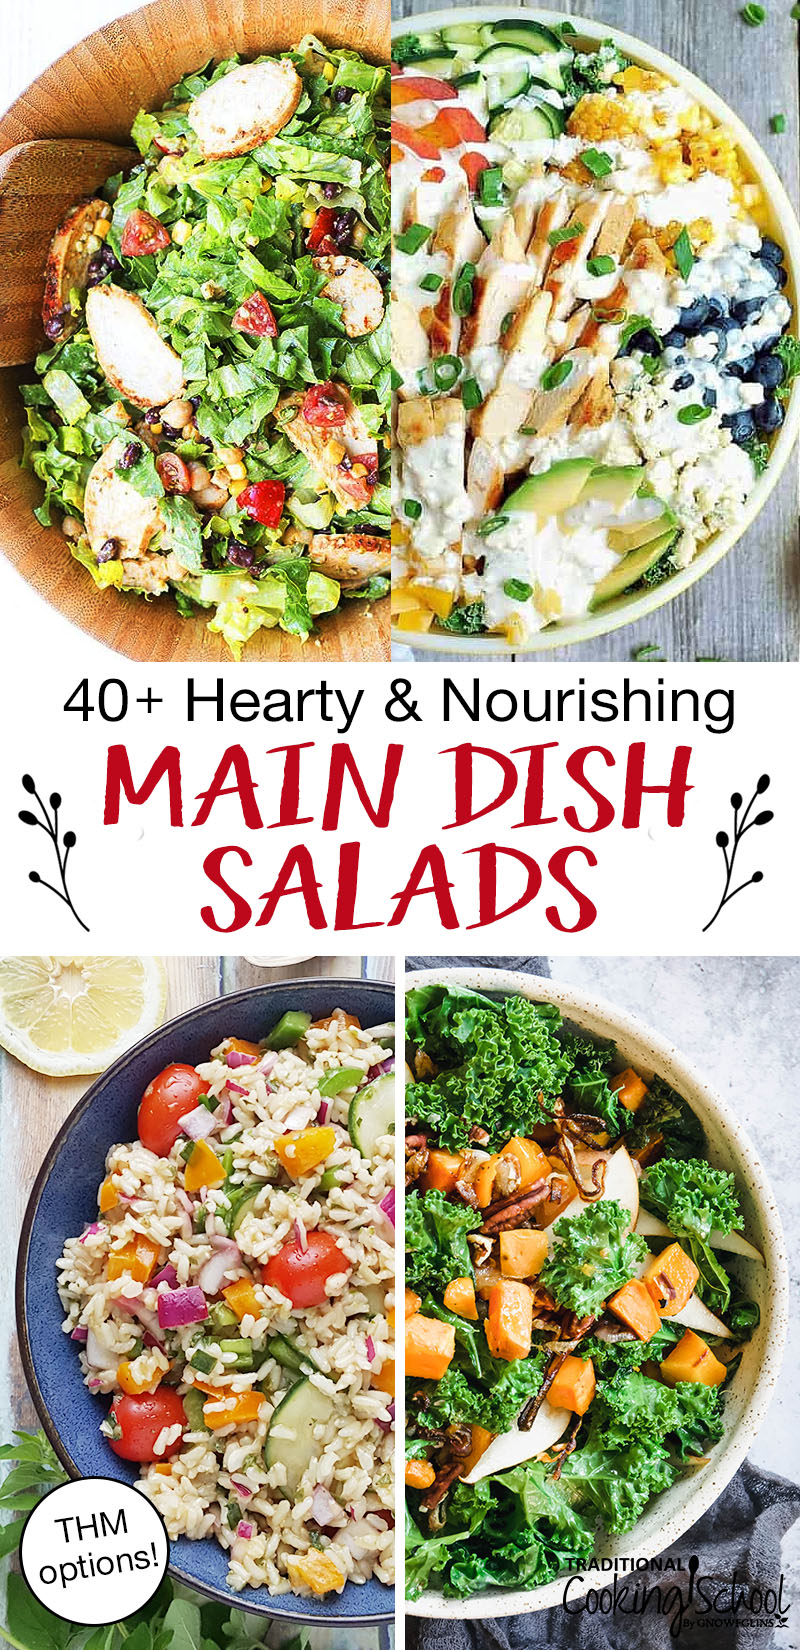 photo collage of four colorful salads with text overlay: "40+ Hearty & Nourishing Main Dish Salads (THM options!)"